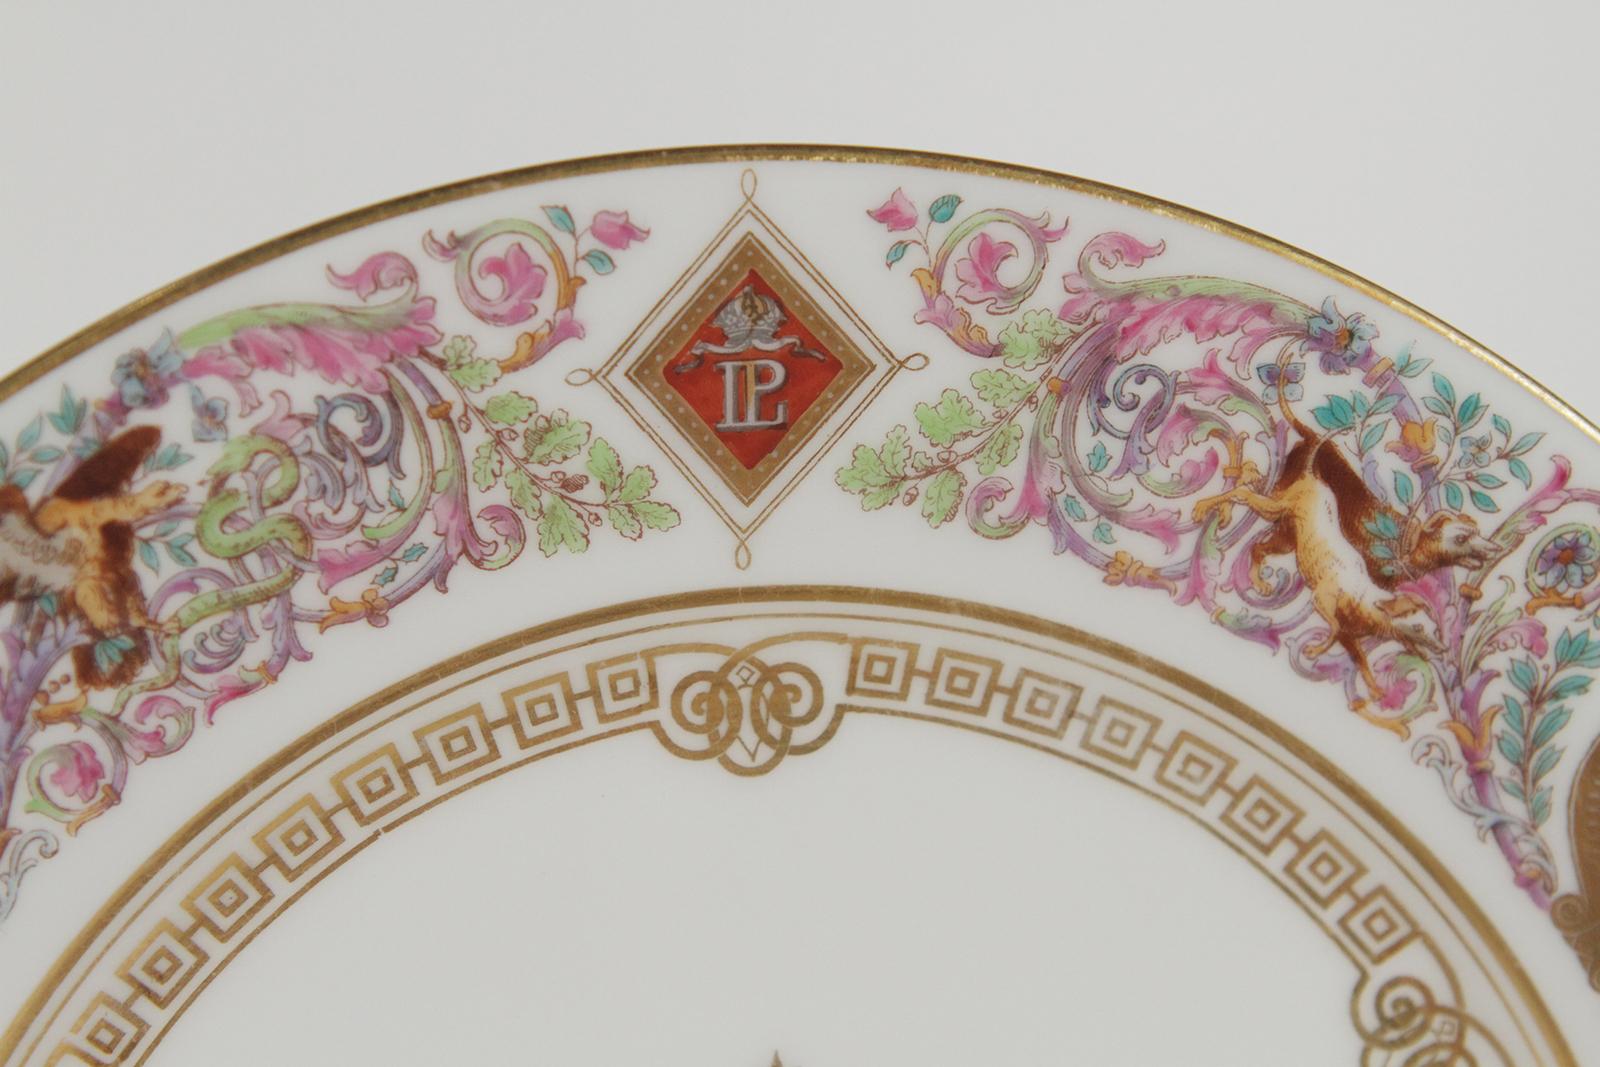 Set of ten Sevres Royal service Chateau de Fontaine bleau plates France, circa 1846. Each plate decorated with Greek key patter and border of beasts among folliage interspersed with LP monograms and cartouches. The plates with Central starburst